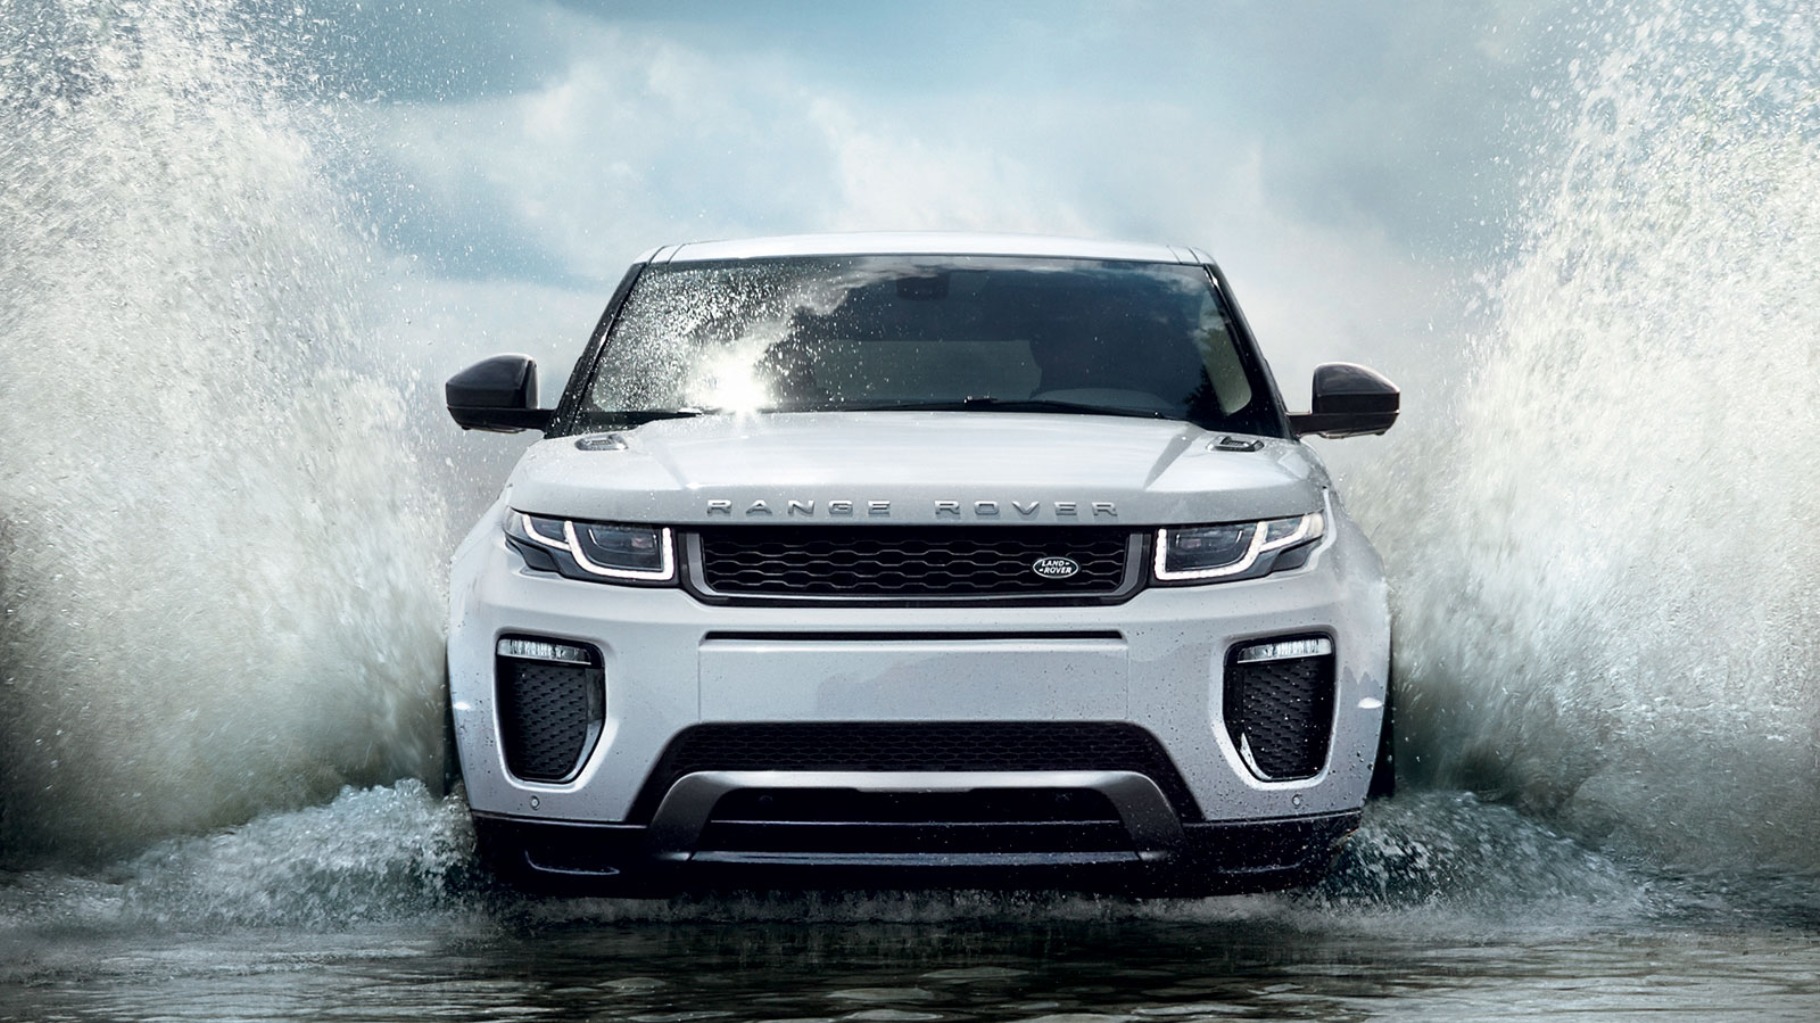 Performance of the 2018 Land Rover Range Rover Evoqueperformance-2018-land-rover-range-rover-evoque